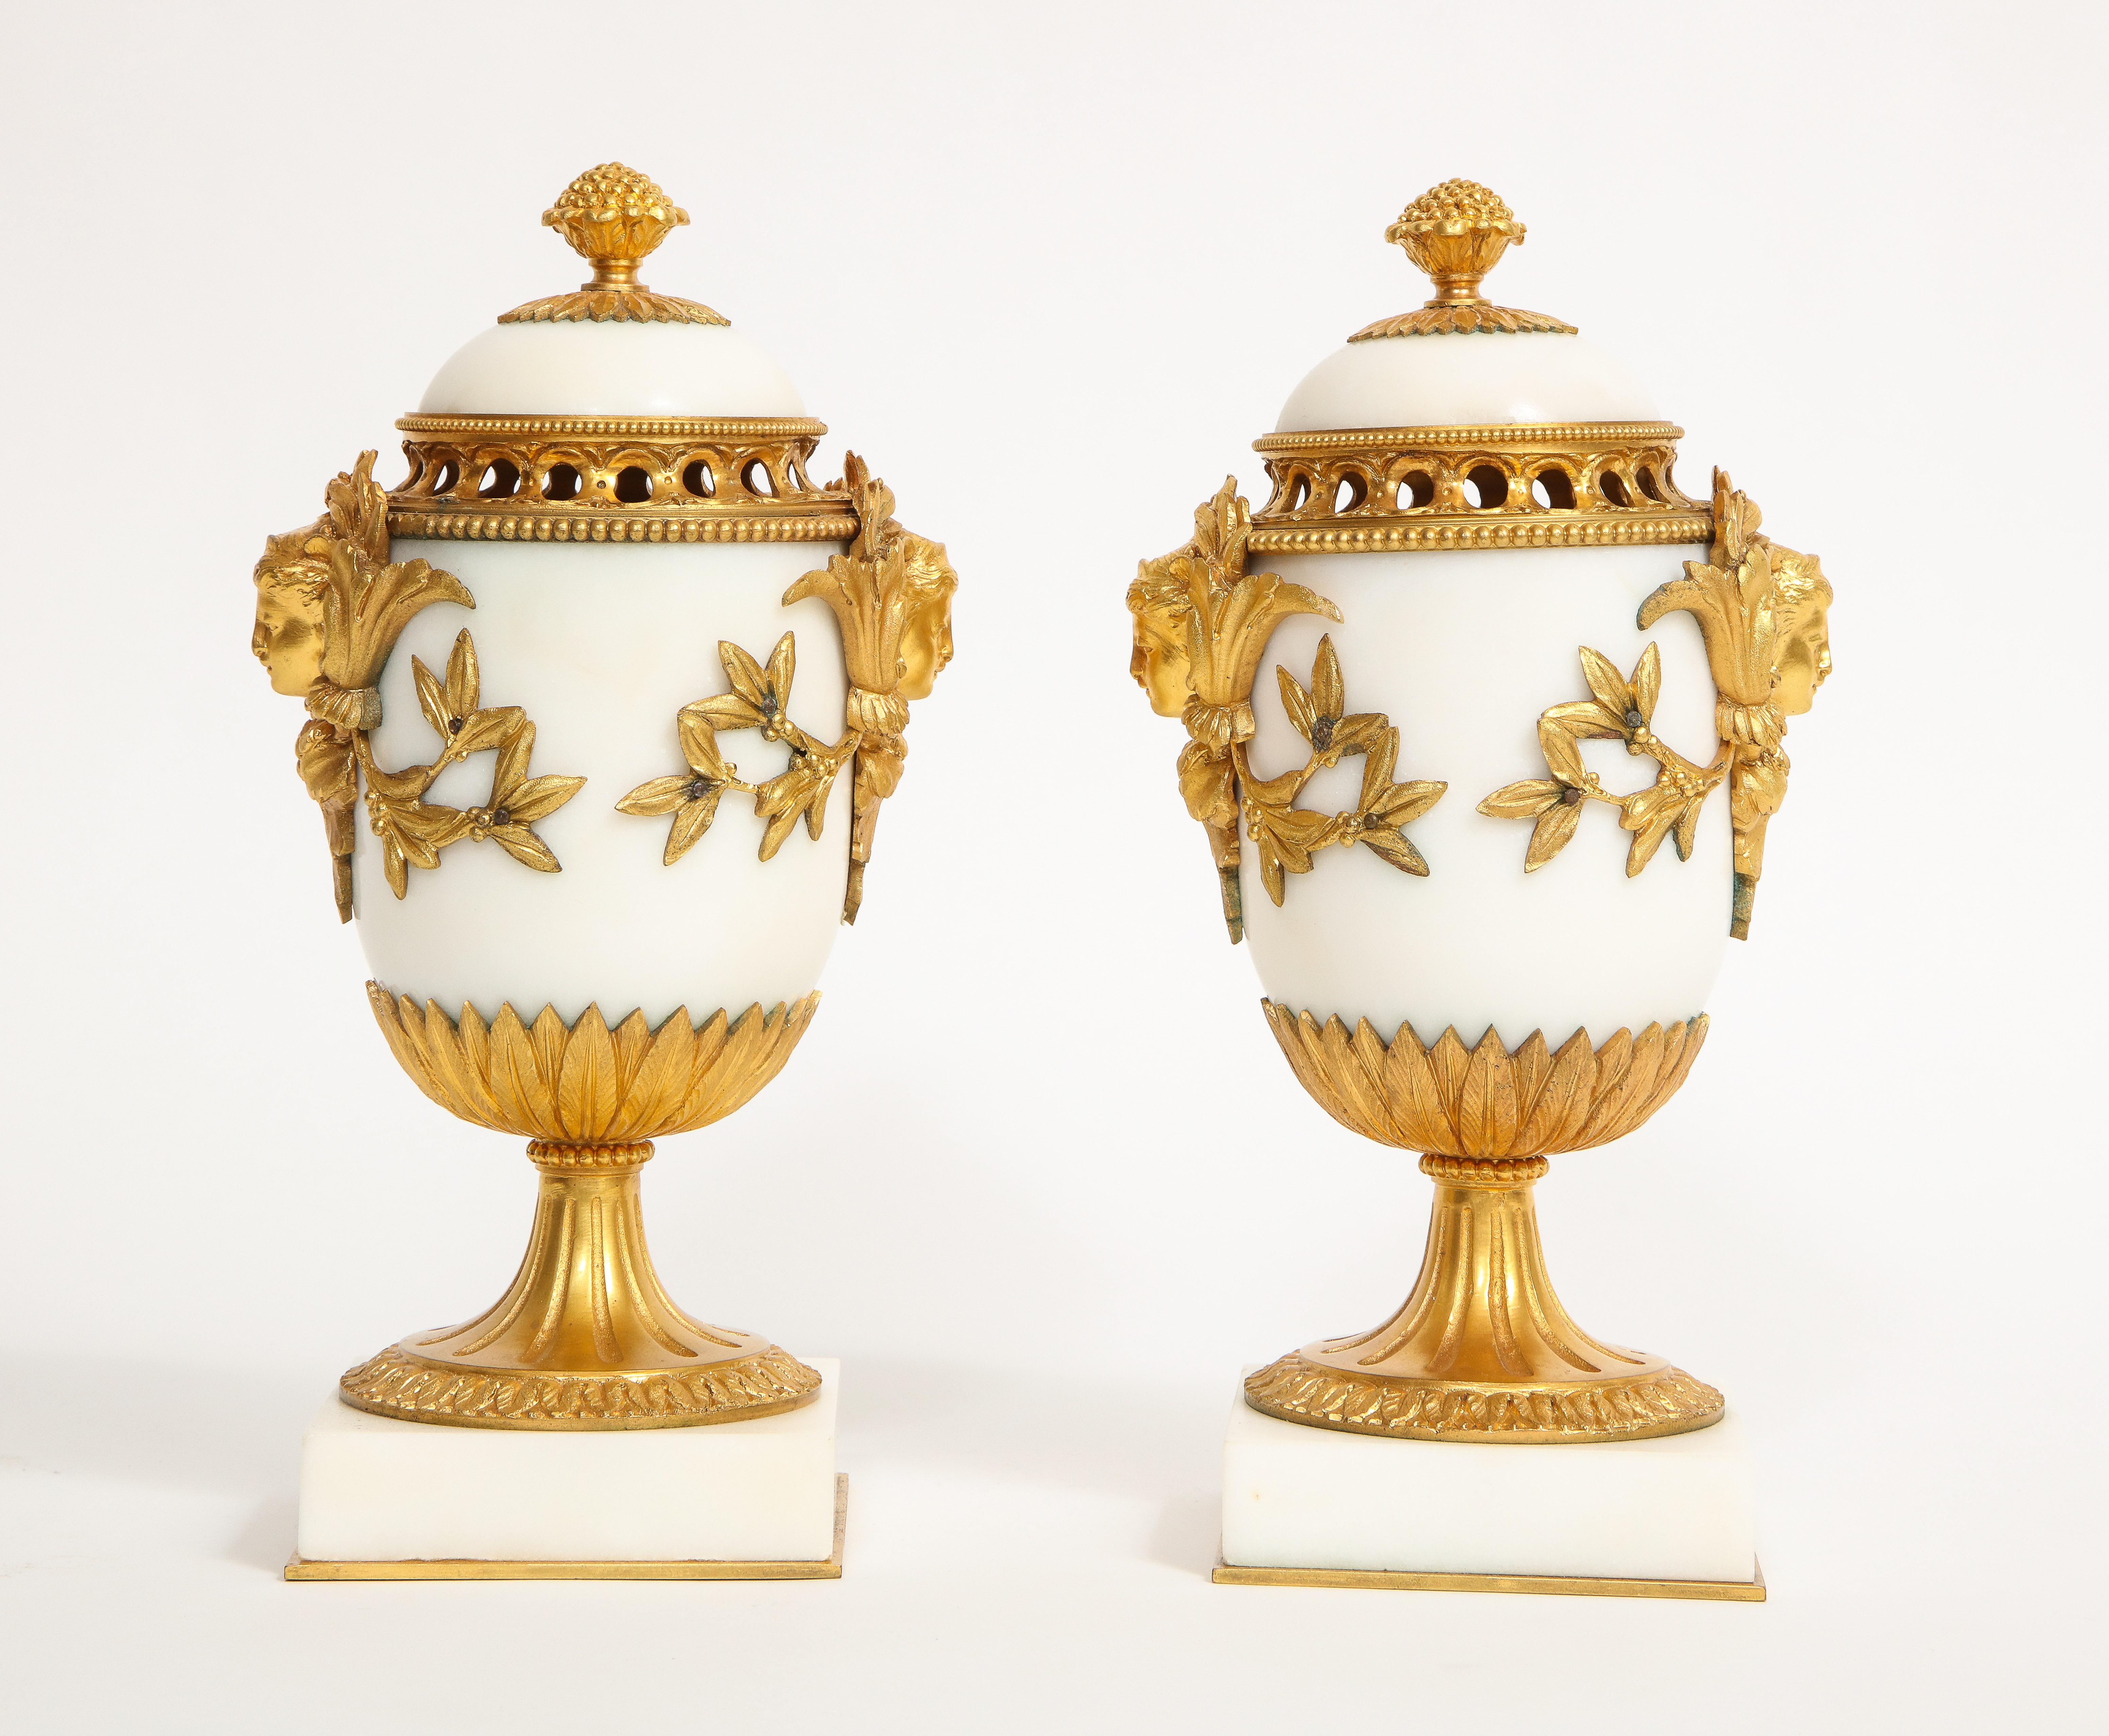 A magnificent pair of French 19th century Louis XVI style dore bronze mounted maiden mask handel potpourri's, attributed to Henry Dasson. Each is made of the finest quality of white carrara marble and the finest cast, hand-chassed and hand-chiseled